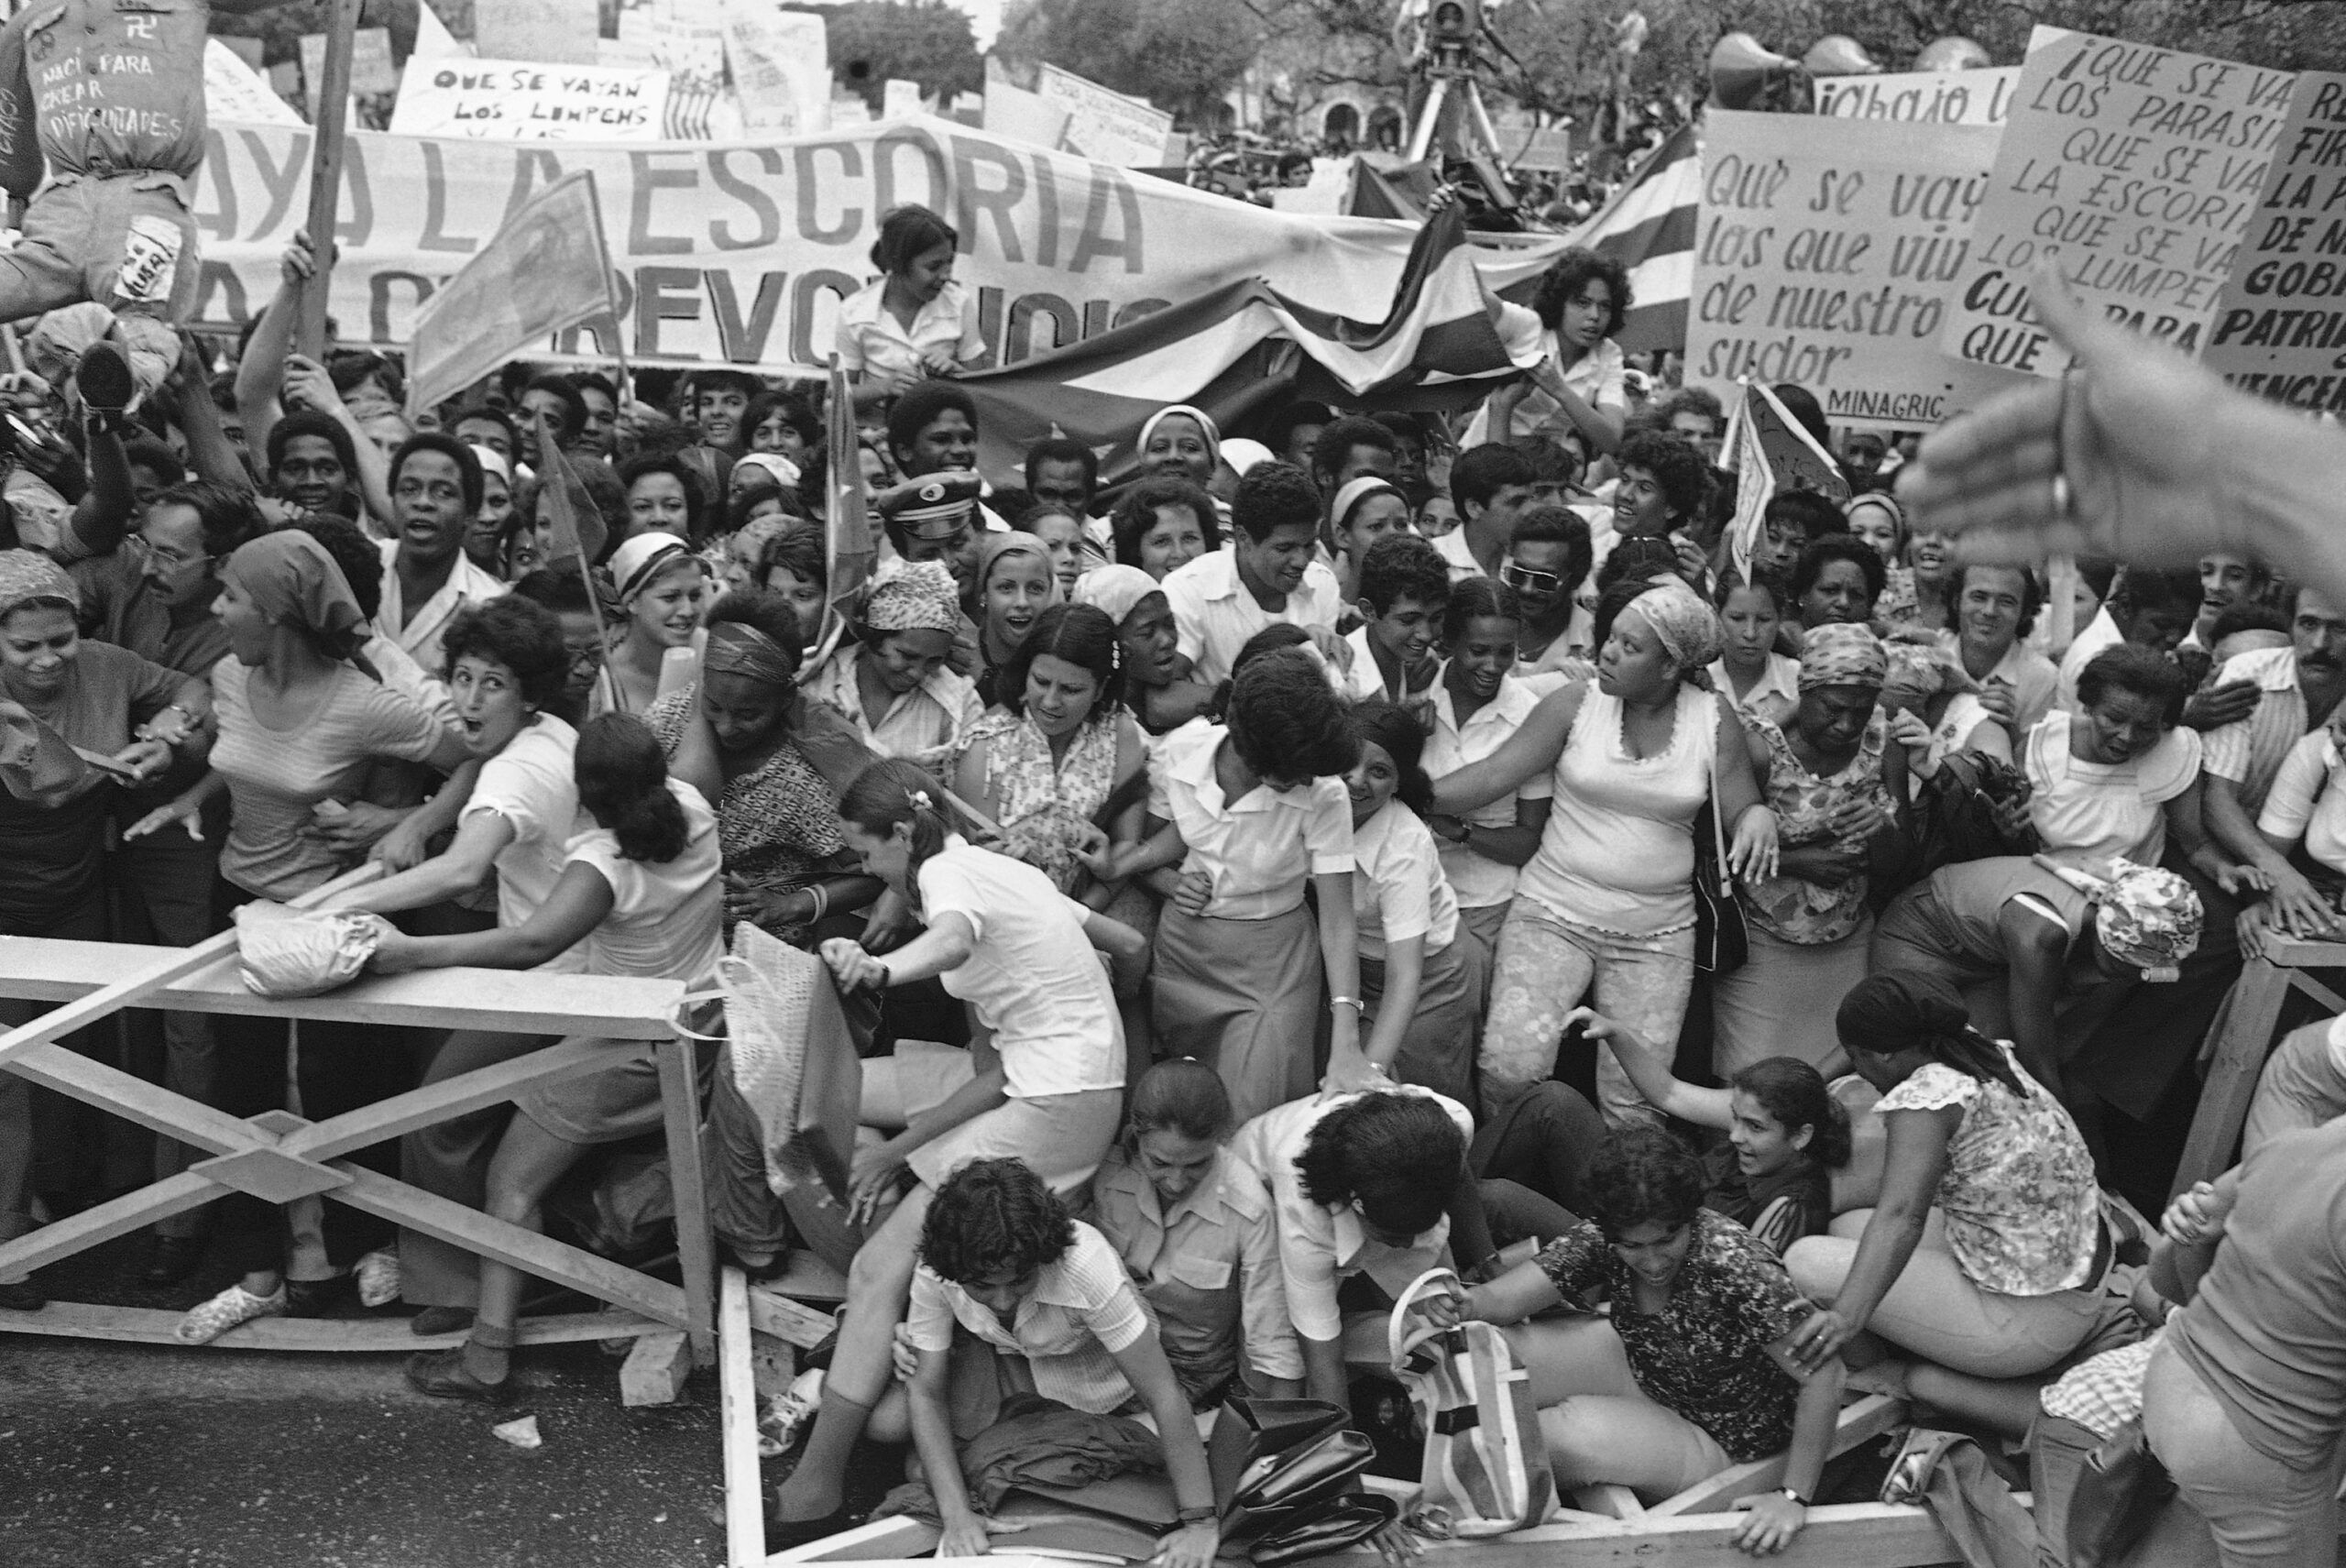 Cubans spill onto the street as a barricade collapsed in Havana on the perimeter surrounding the Peruvian embassy on April 16, 1980